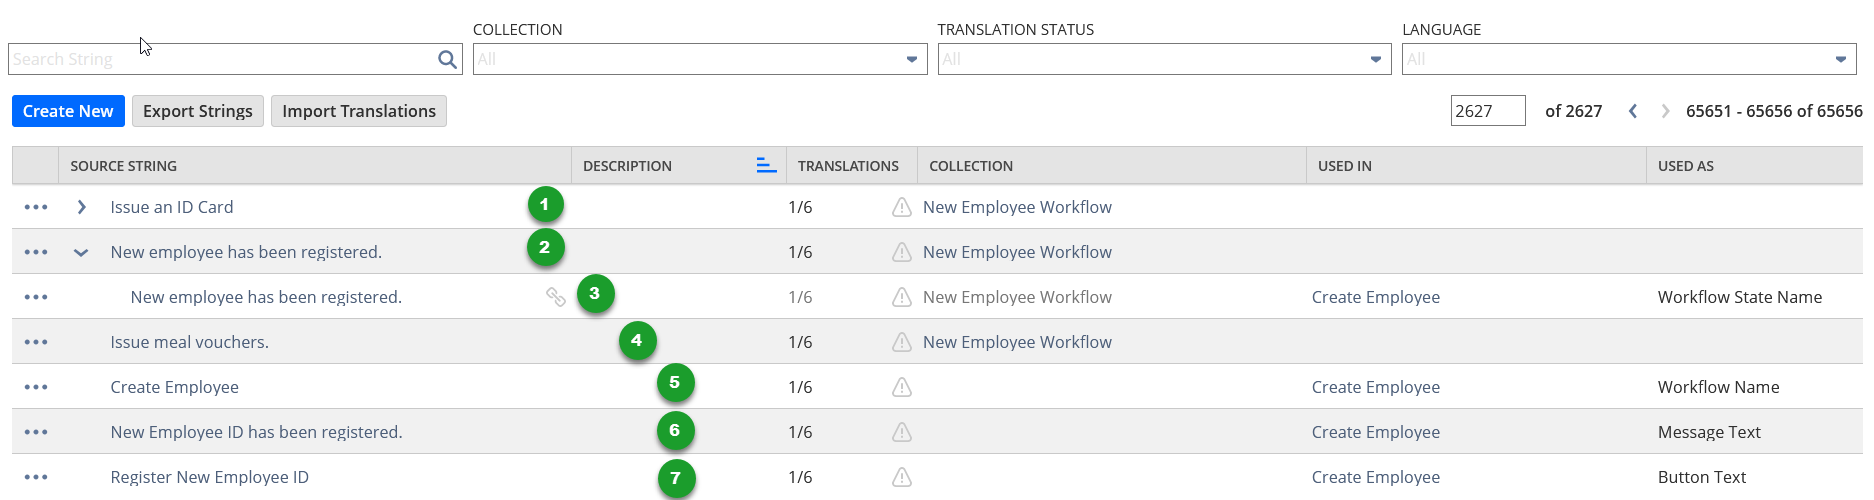 Strings subtab on the Manage Translations page.